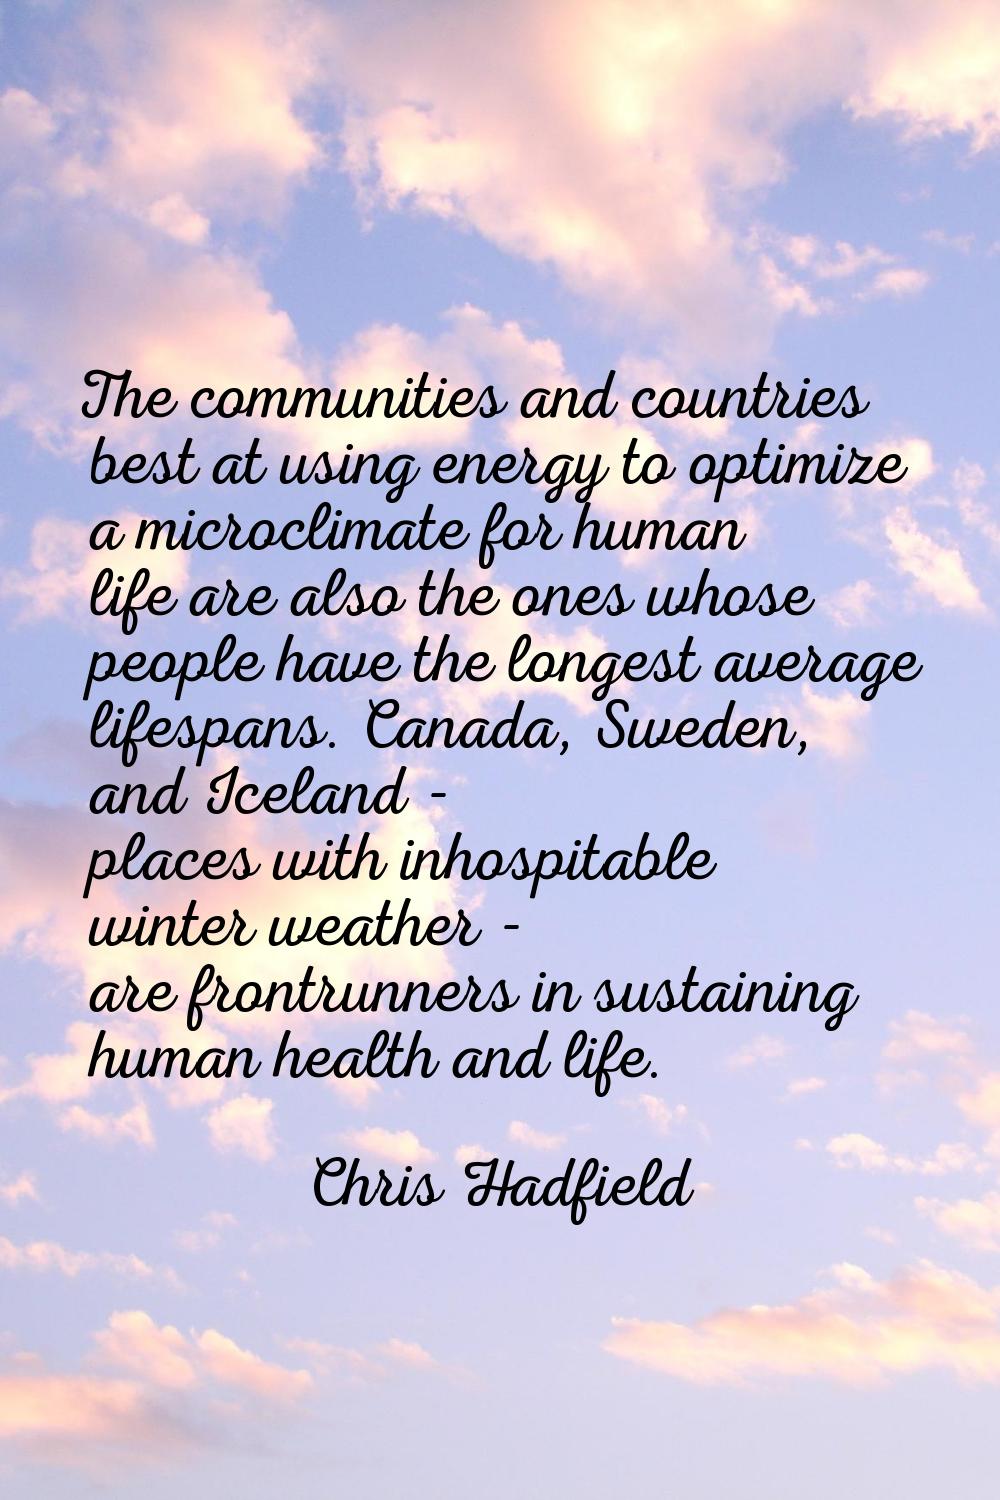 The communities and countries best at using energy to optimize a microclimate for human life are al